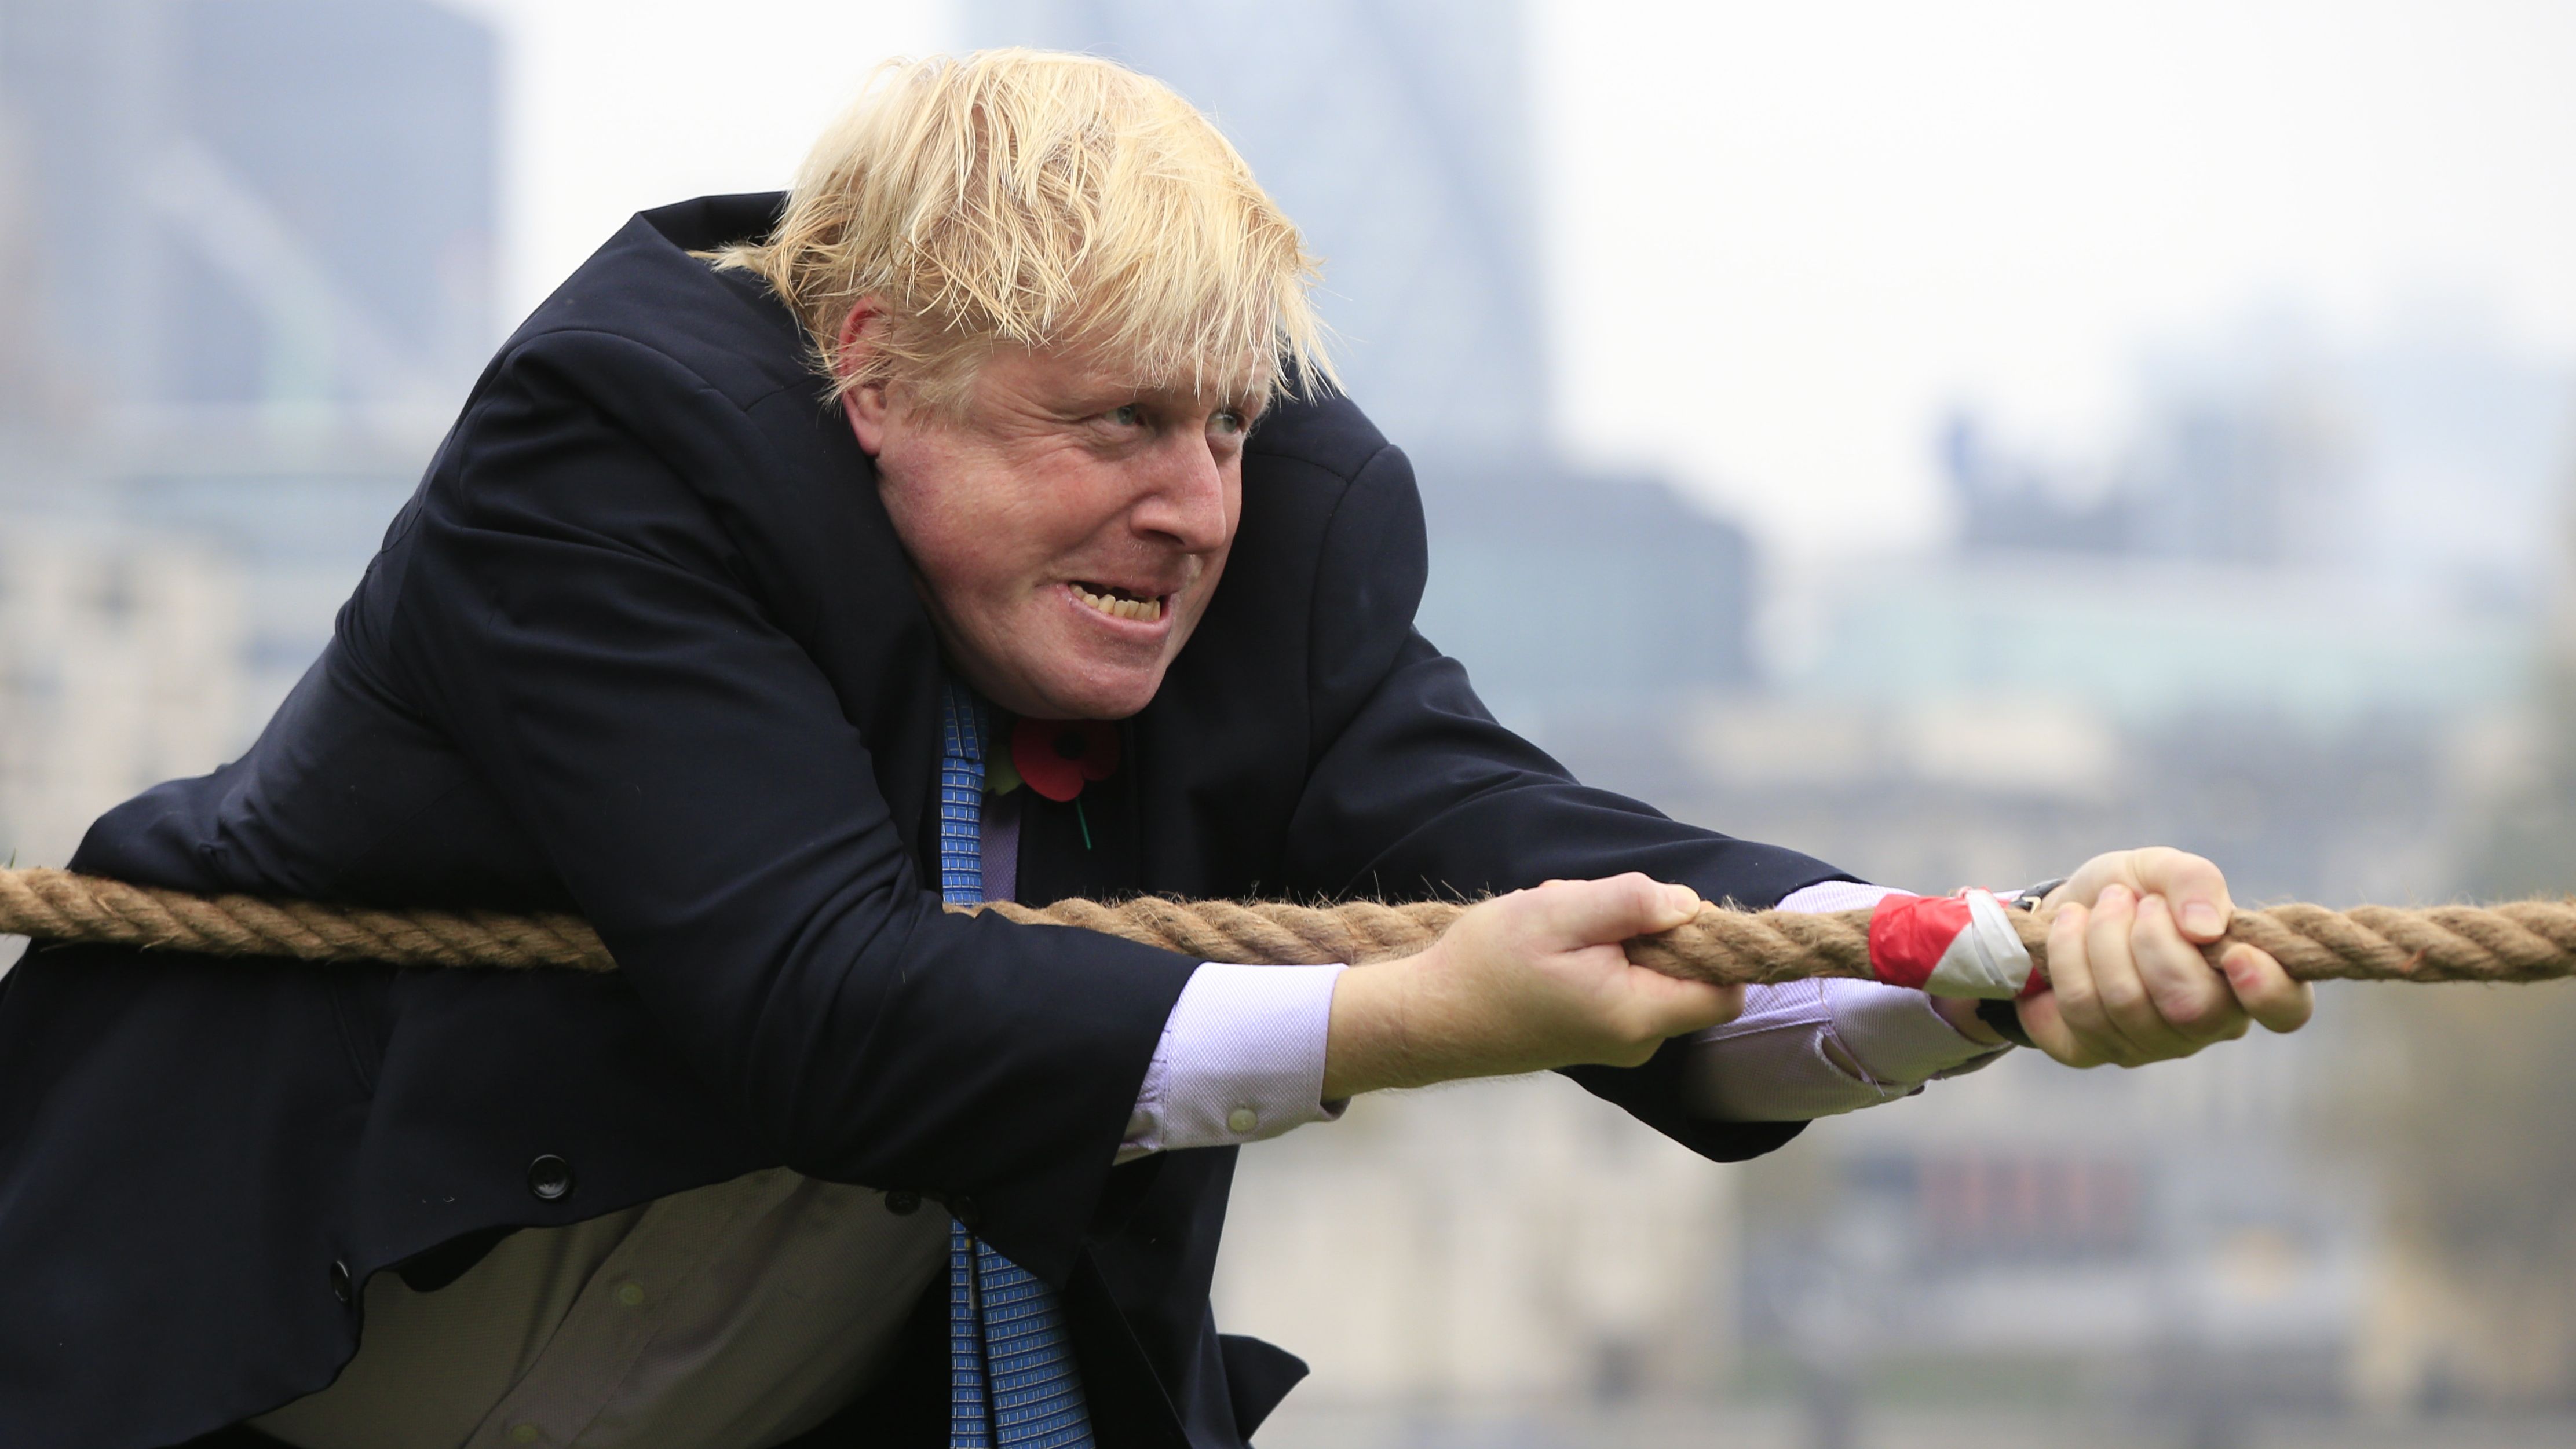 Johnson takes part in a charity tug-of-war  with British military personnel in October 2015.